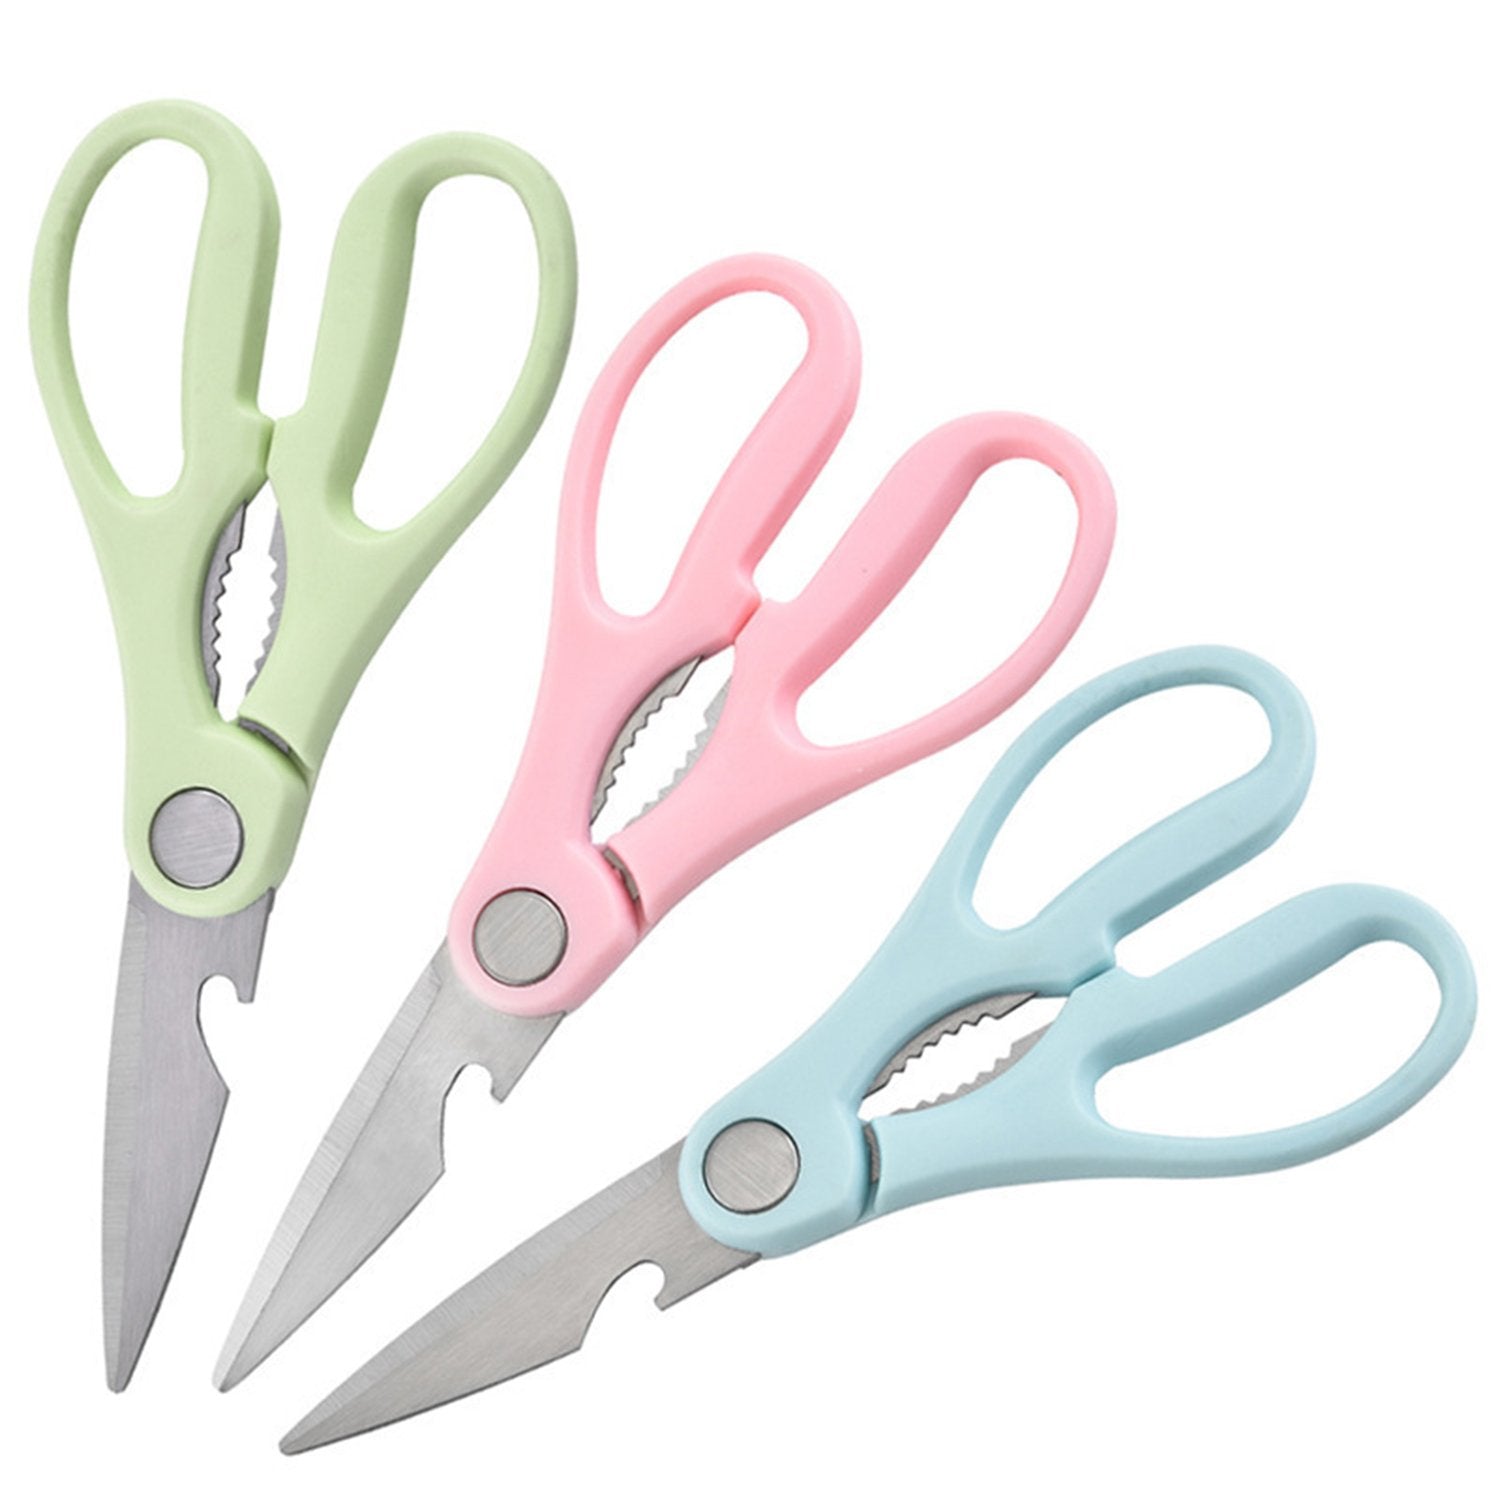 0561A Multipurpose Kitchen/Household/Garden Scissor  (Color may vary)